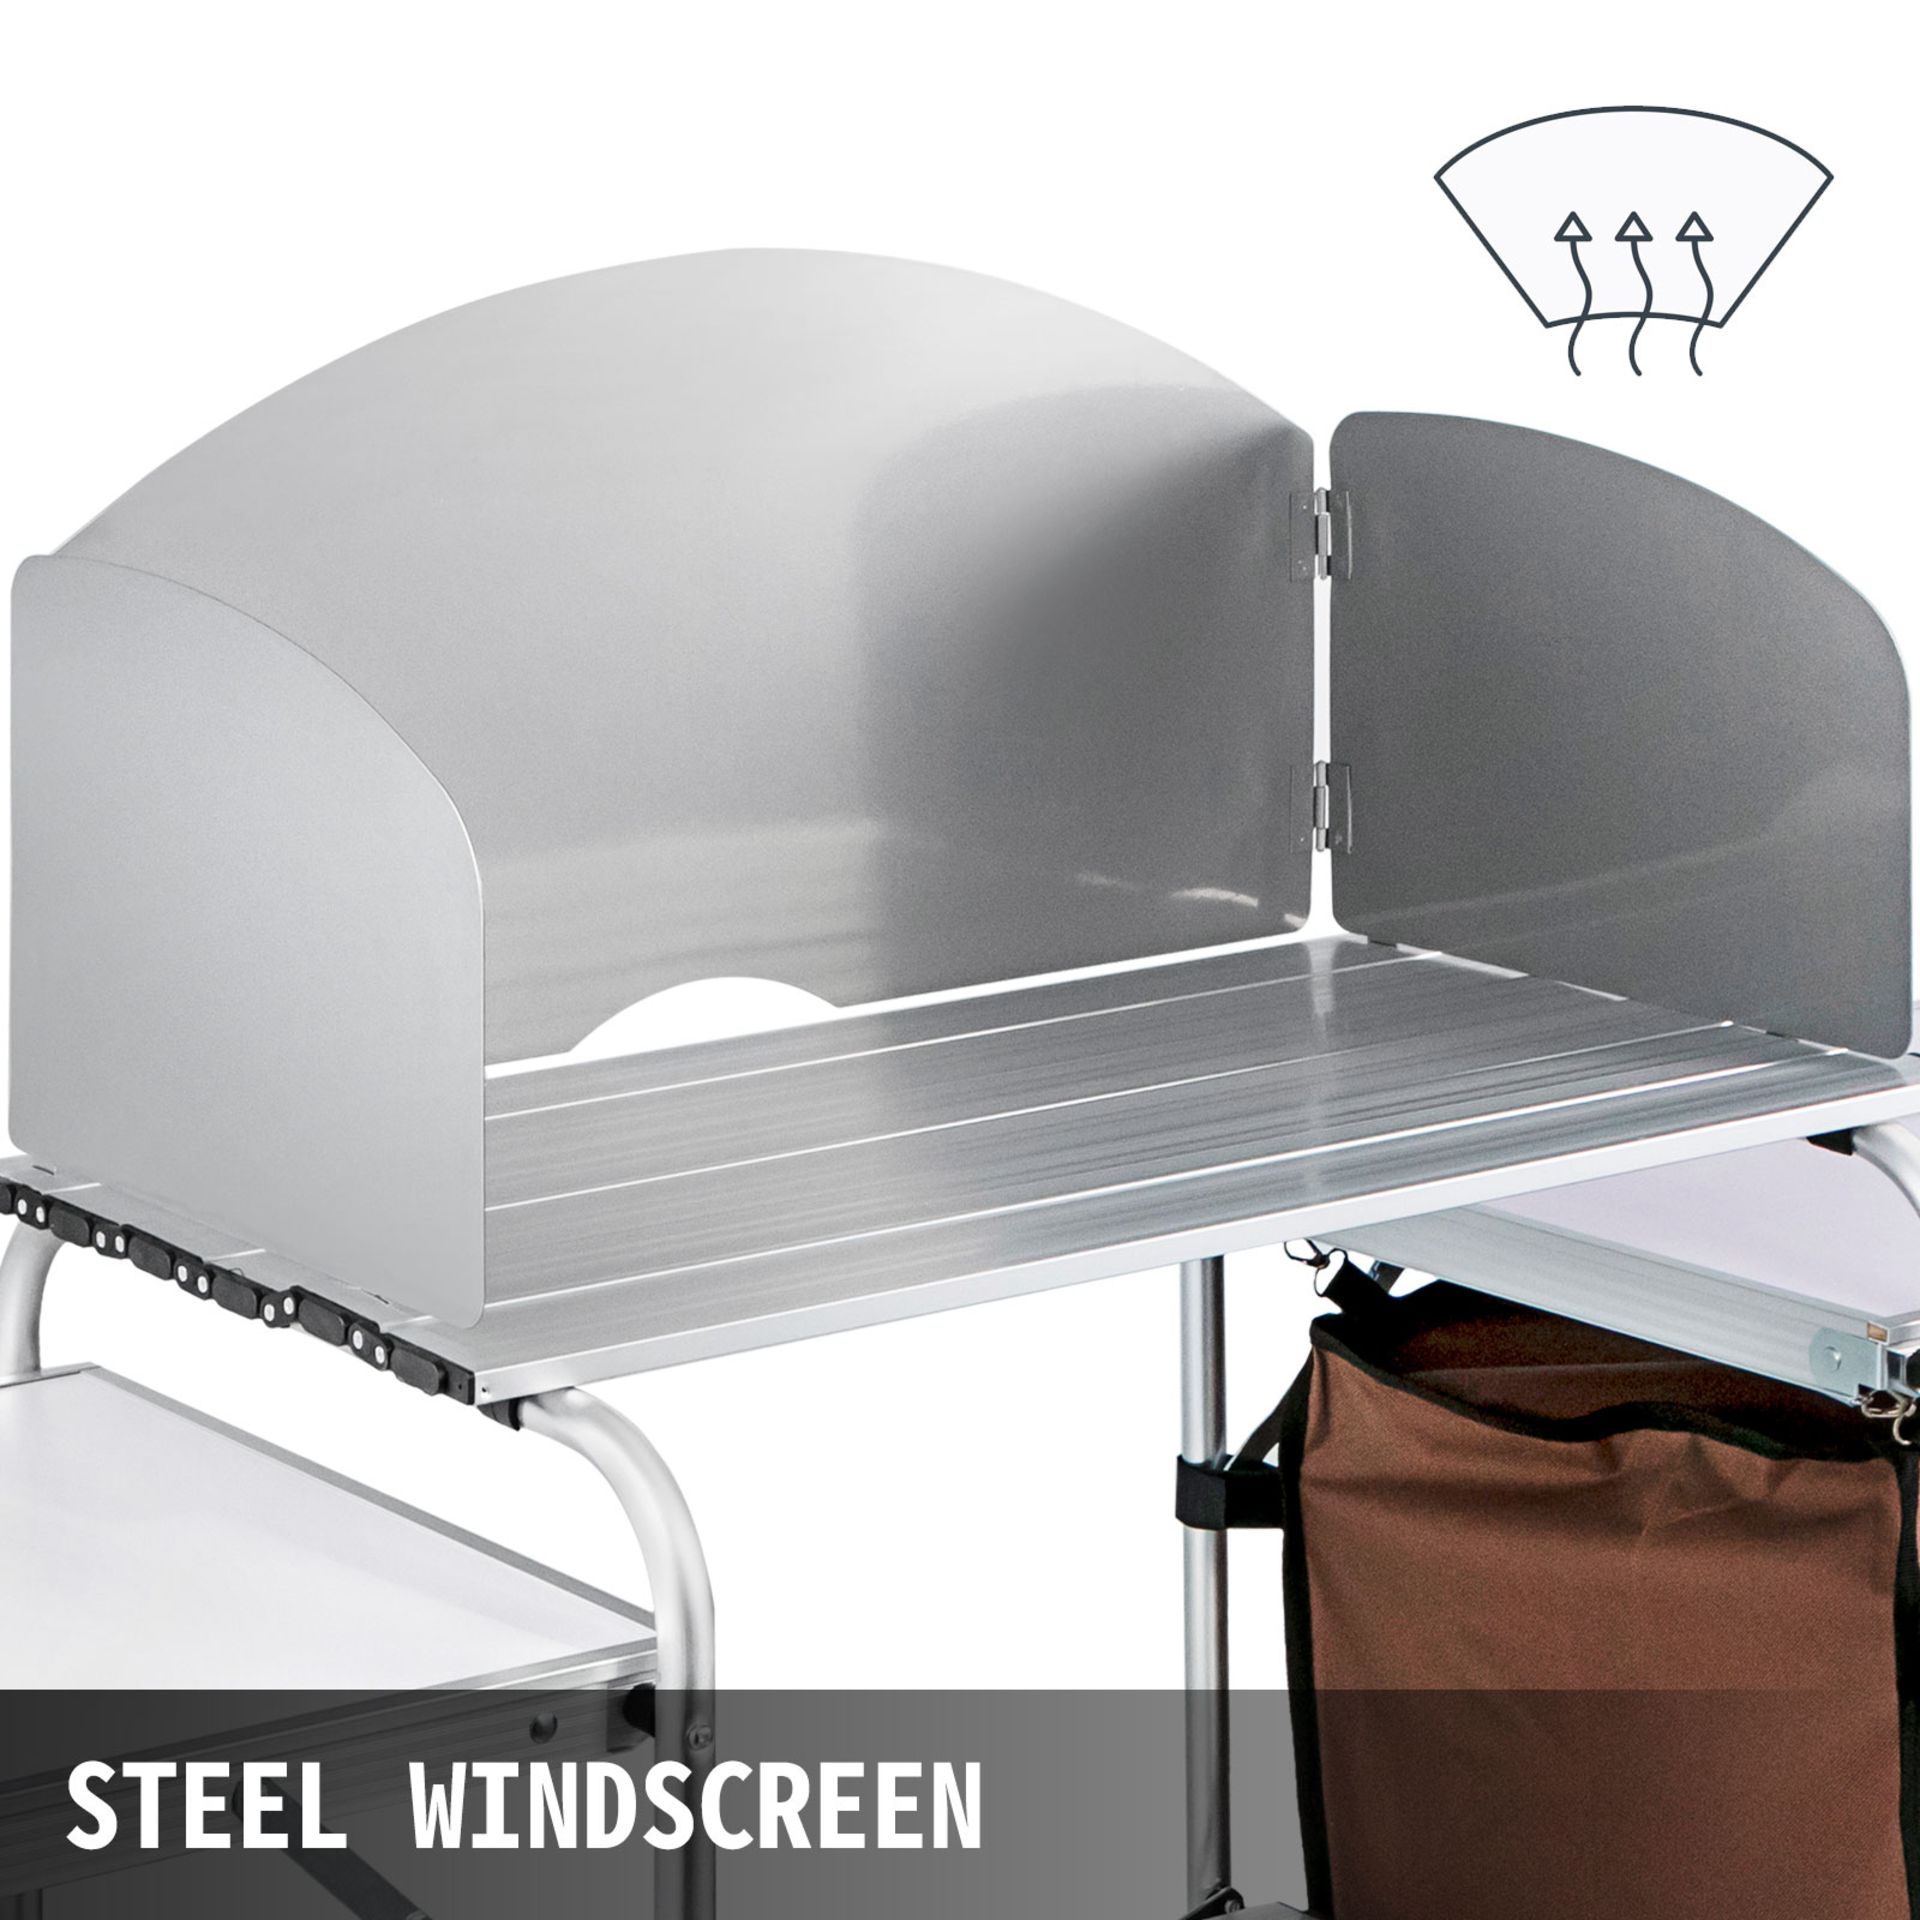 PORTABLE OUTDOOR COLLAPSIBLE KITCHEN PREP TABLE (NEW) (MSRP $225) - Image 3 of 5